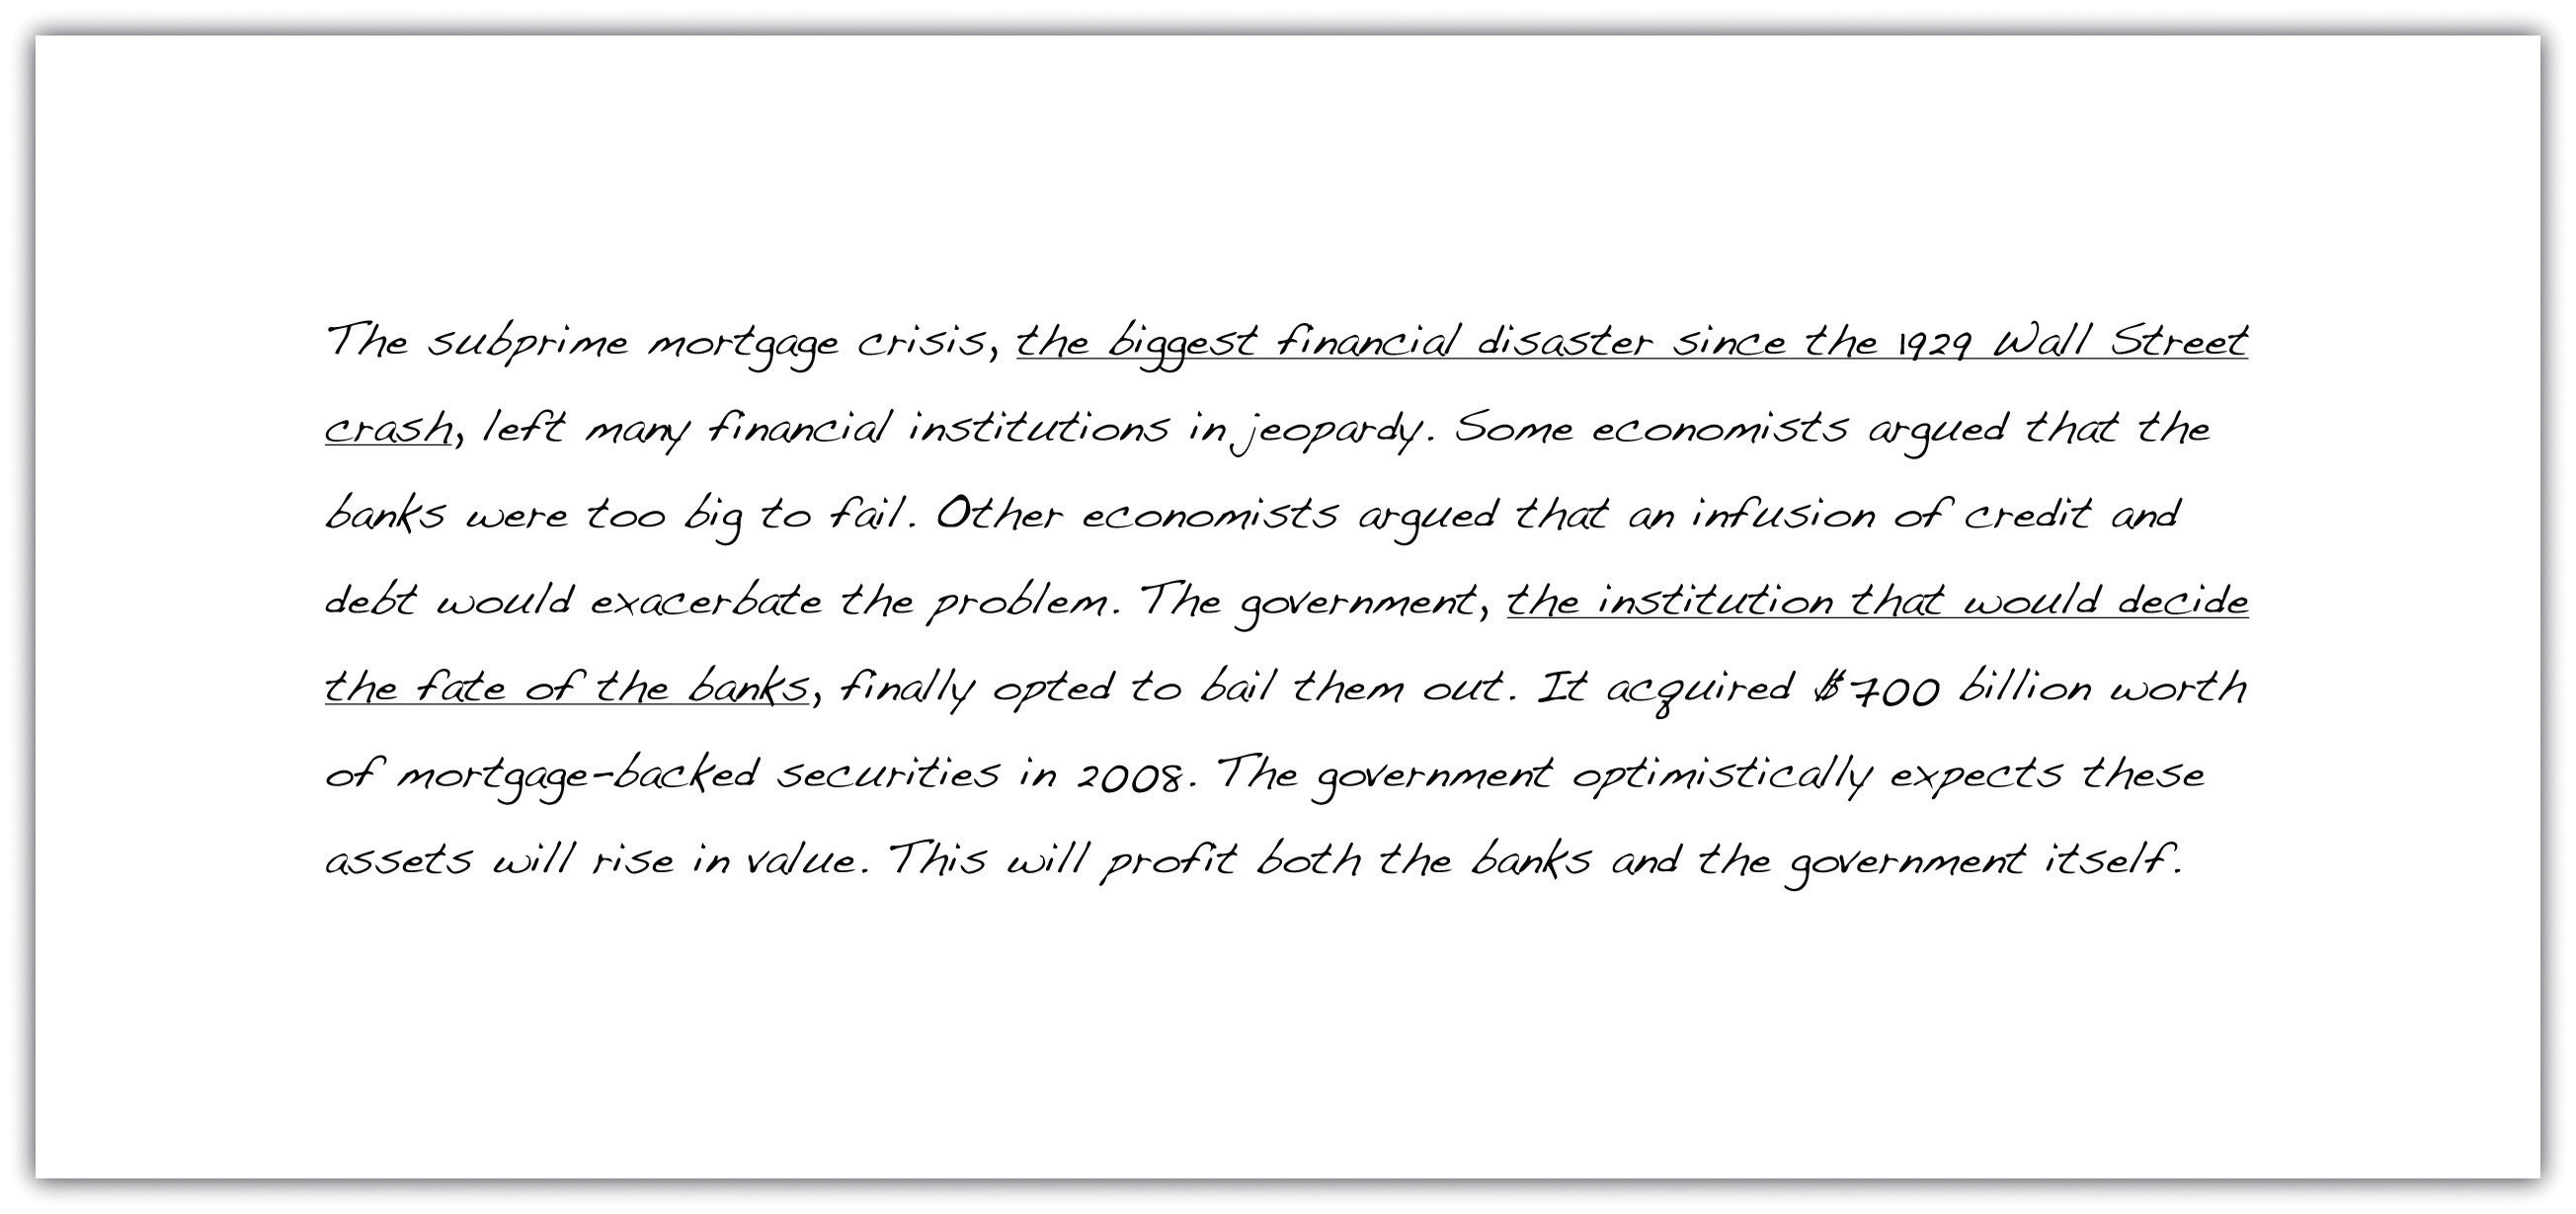 The subprime mortgage crisis, the biggest financial disaster since the 1929 Wall Street crash, left many financial institutions in jeopardy. Some economists argued that the banks were too big to fail. Other economists argued that an infusion of credit and debt would exacerbate the problem. The government, the institution that would decide the fate of the banks, finallly opted to bail them out. It acquired $700 billion worth of mortgage-backed securities in 2008. The government optimistically expects these assets will rise in value. This will profit both the banks and the government itself.